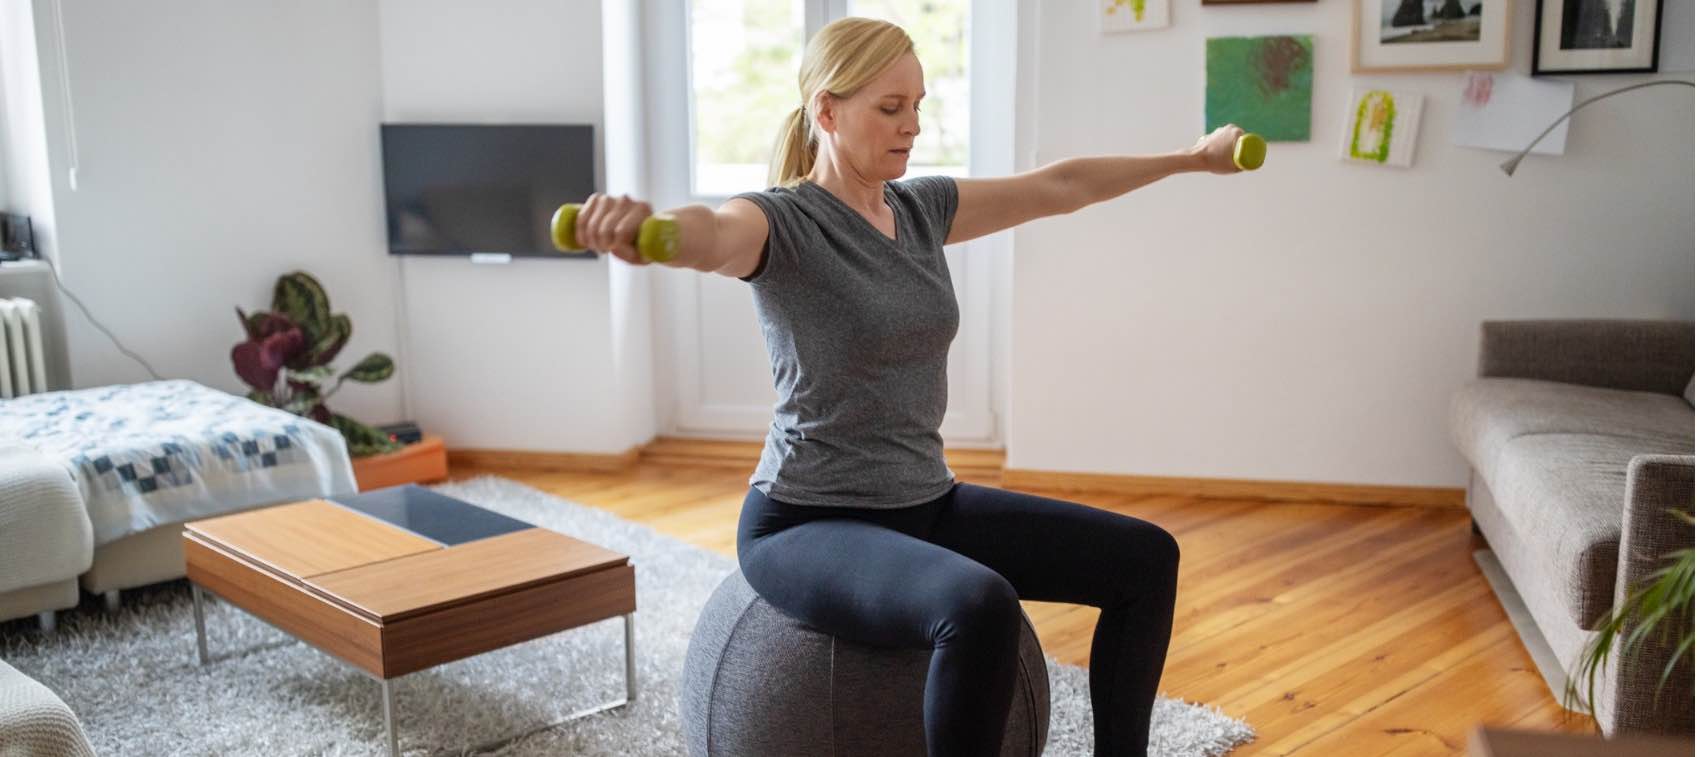 Premium Photo  Woman performs an exercise to strengthen the muscles of the  back and arms using a chair